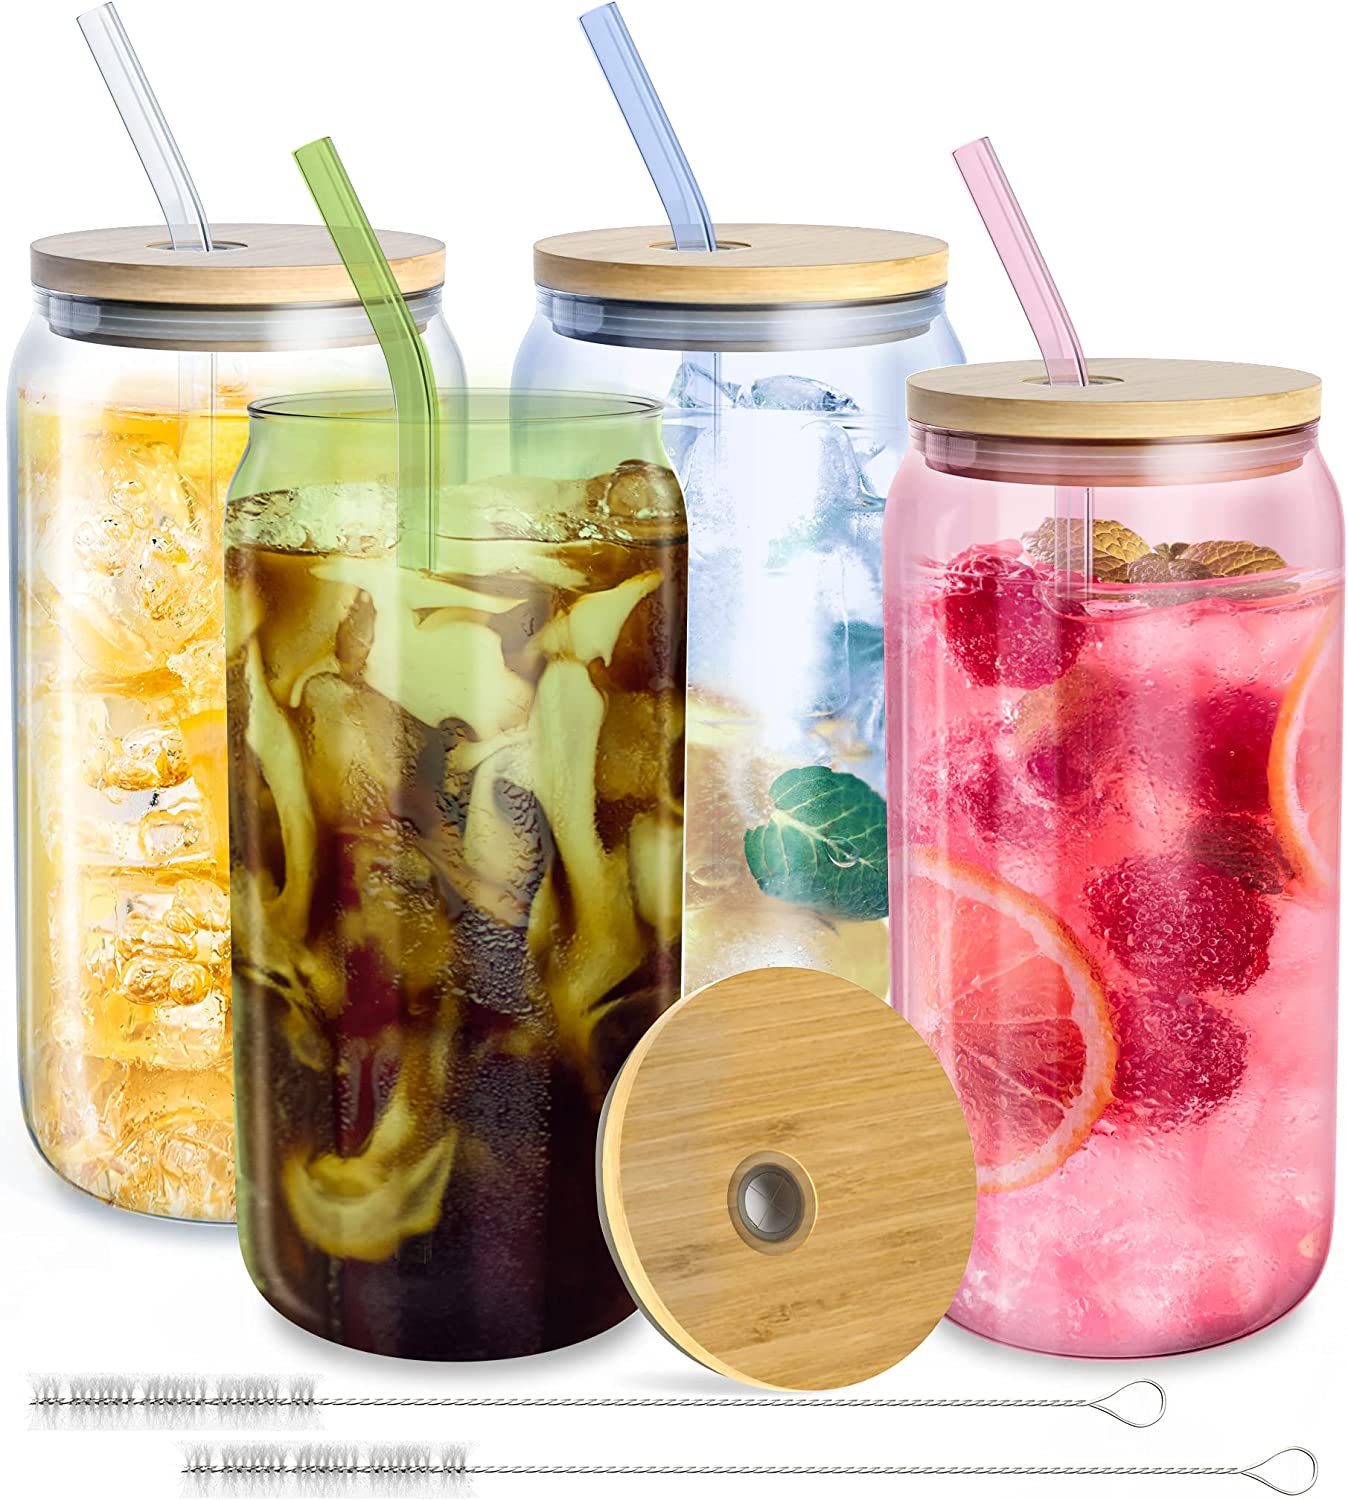 HOMBERKING Glass Cups with Bamboo Lids and Straws 4pcs Set, 4 Packs, Clear